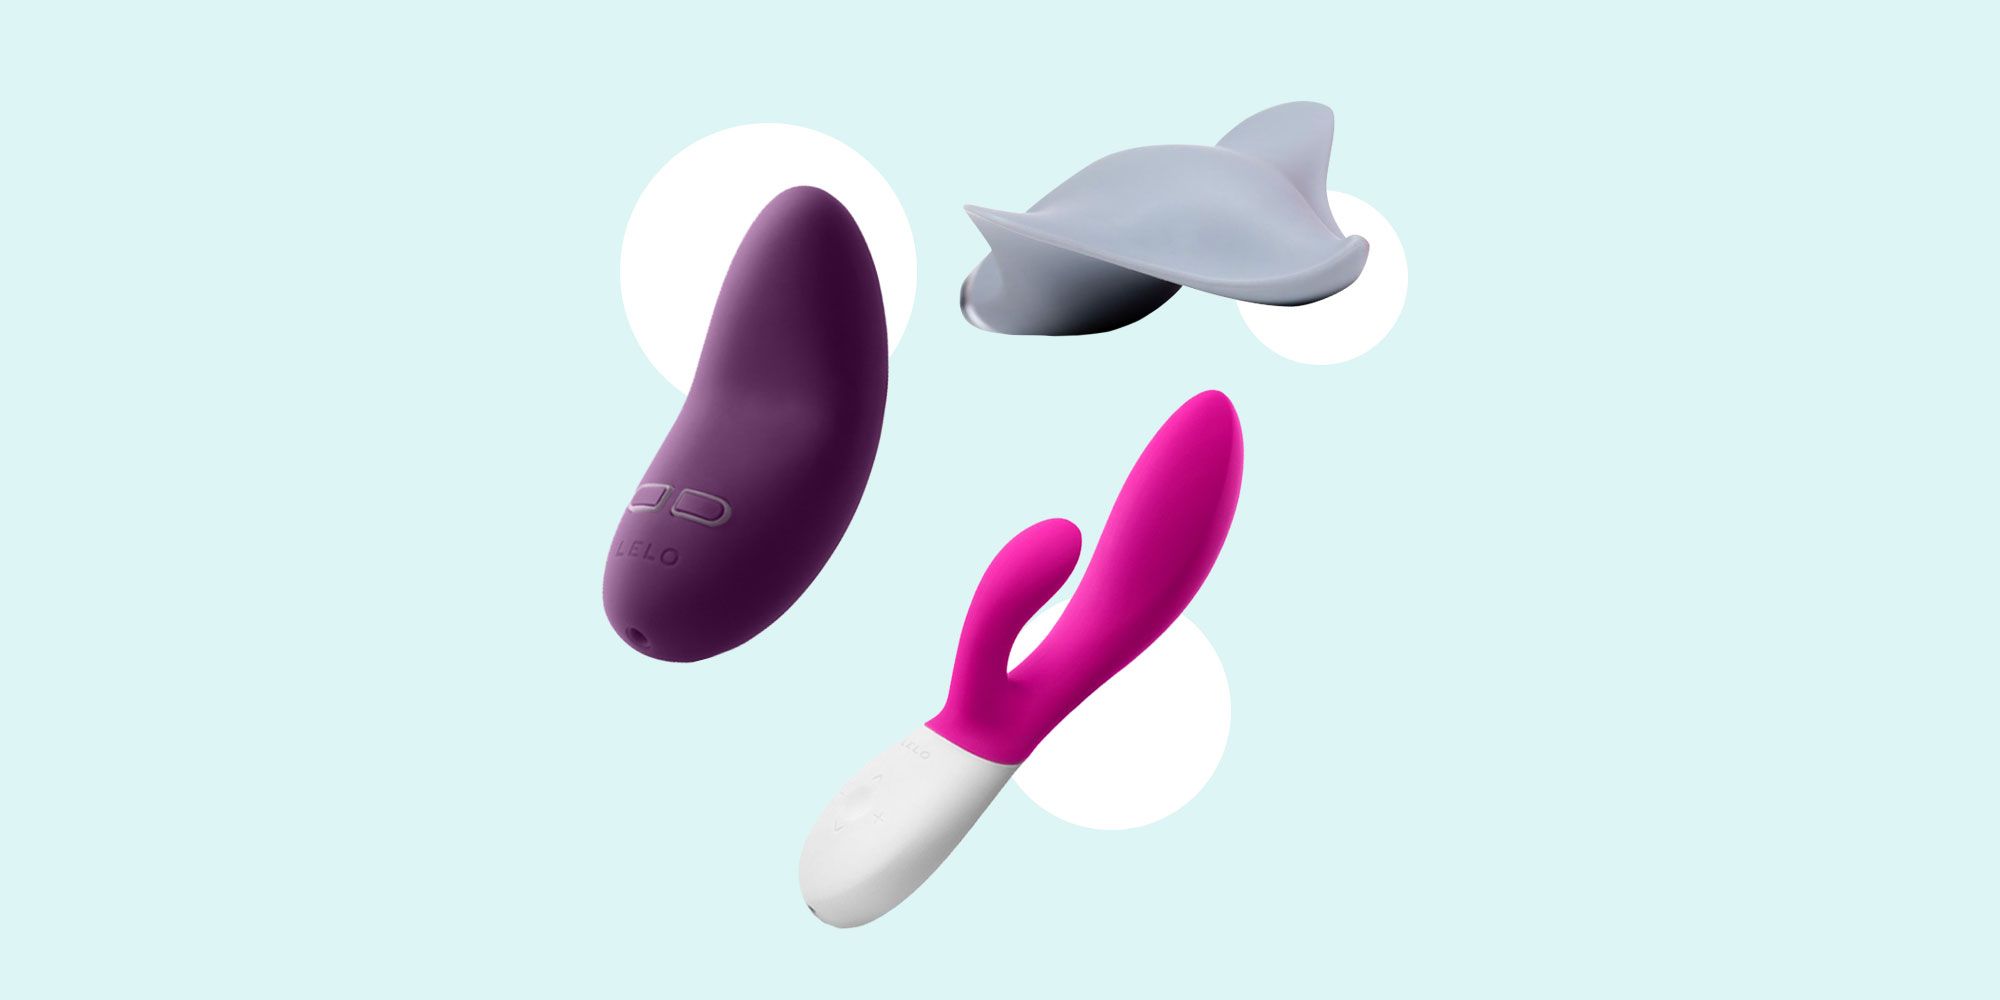 13 Vibrators That Wont Wake Up Your Roommate image